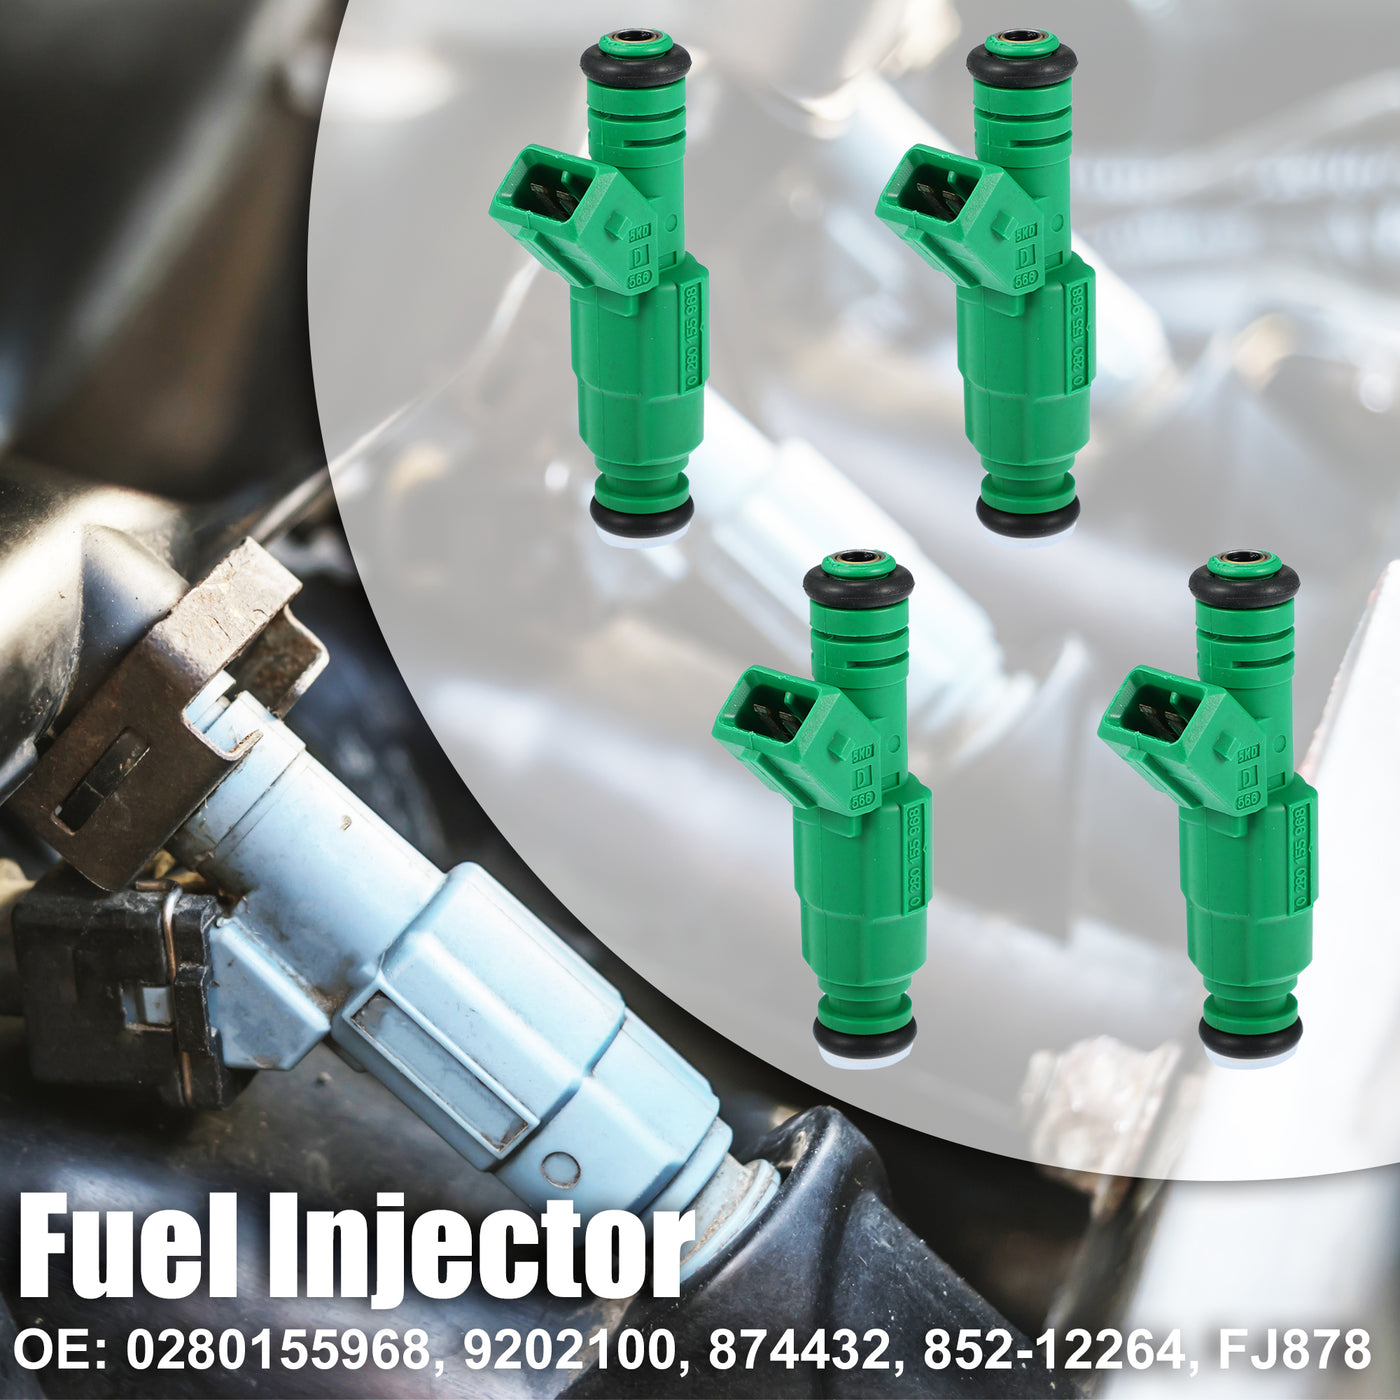 X AUTOHAUX 4pcs 0280155968 No.9202100 Fuel Injector for Volvo C70 2.3T Convertible 98-04 for Volvo S60 2.3T 01-04 2.5T 03-09 for Volvo V70 2.3T 98-04